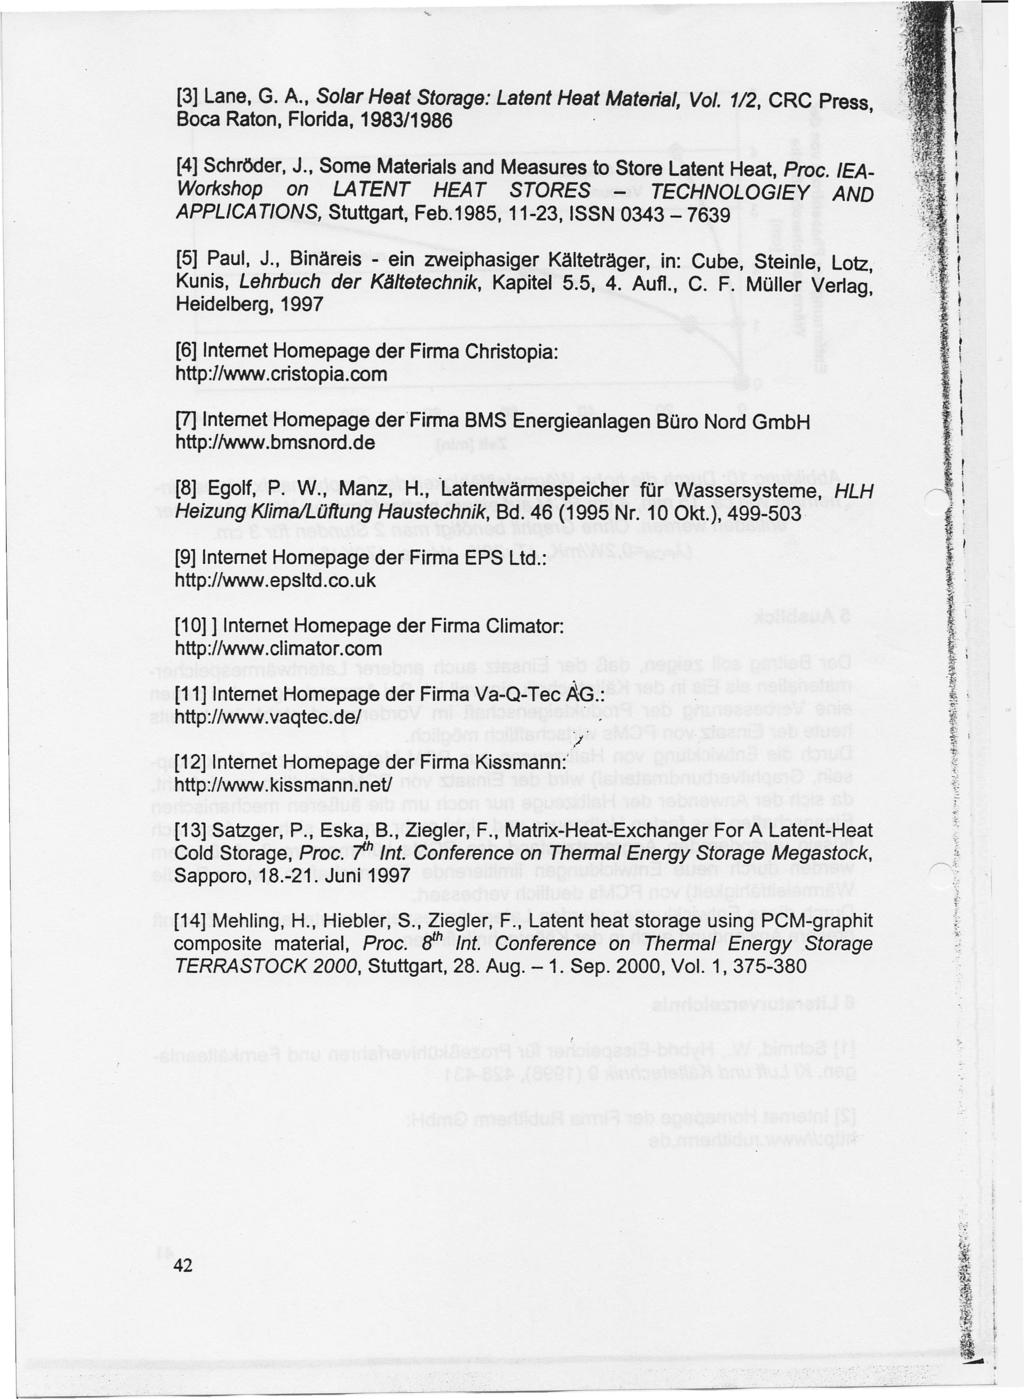 [3] Lane, G. A., Solar Heat Storage: Latent Heat Material, Vol. 1/2, CRC Press Soca Raton, Florida, 1983/1986, ' [4] Schröder, J., Some Materials and Measures to Store Latent Heat, Proc.